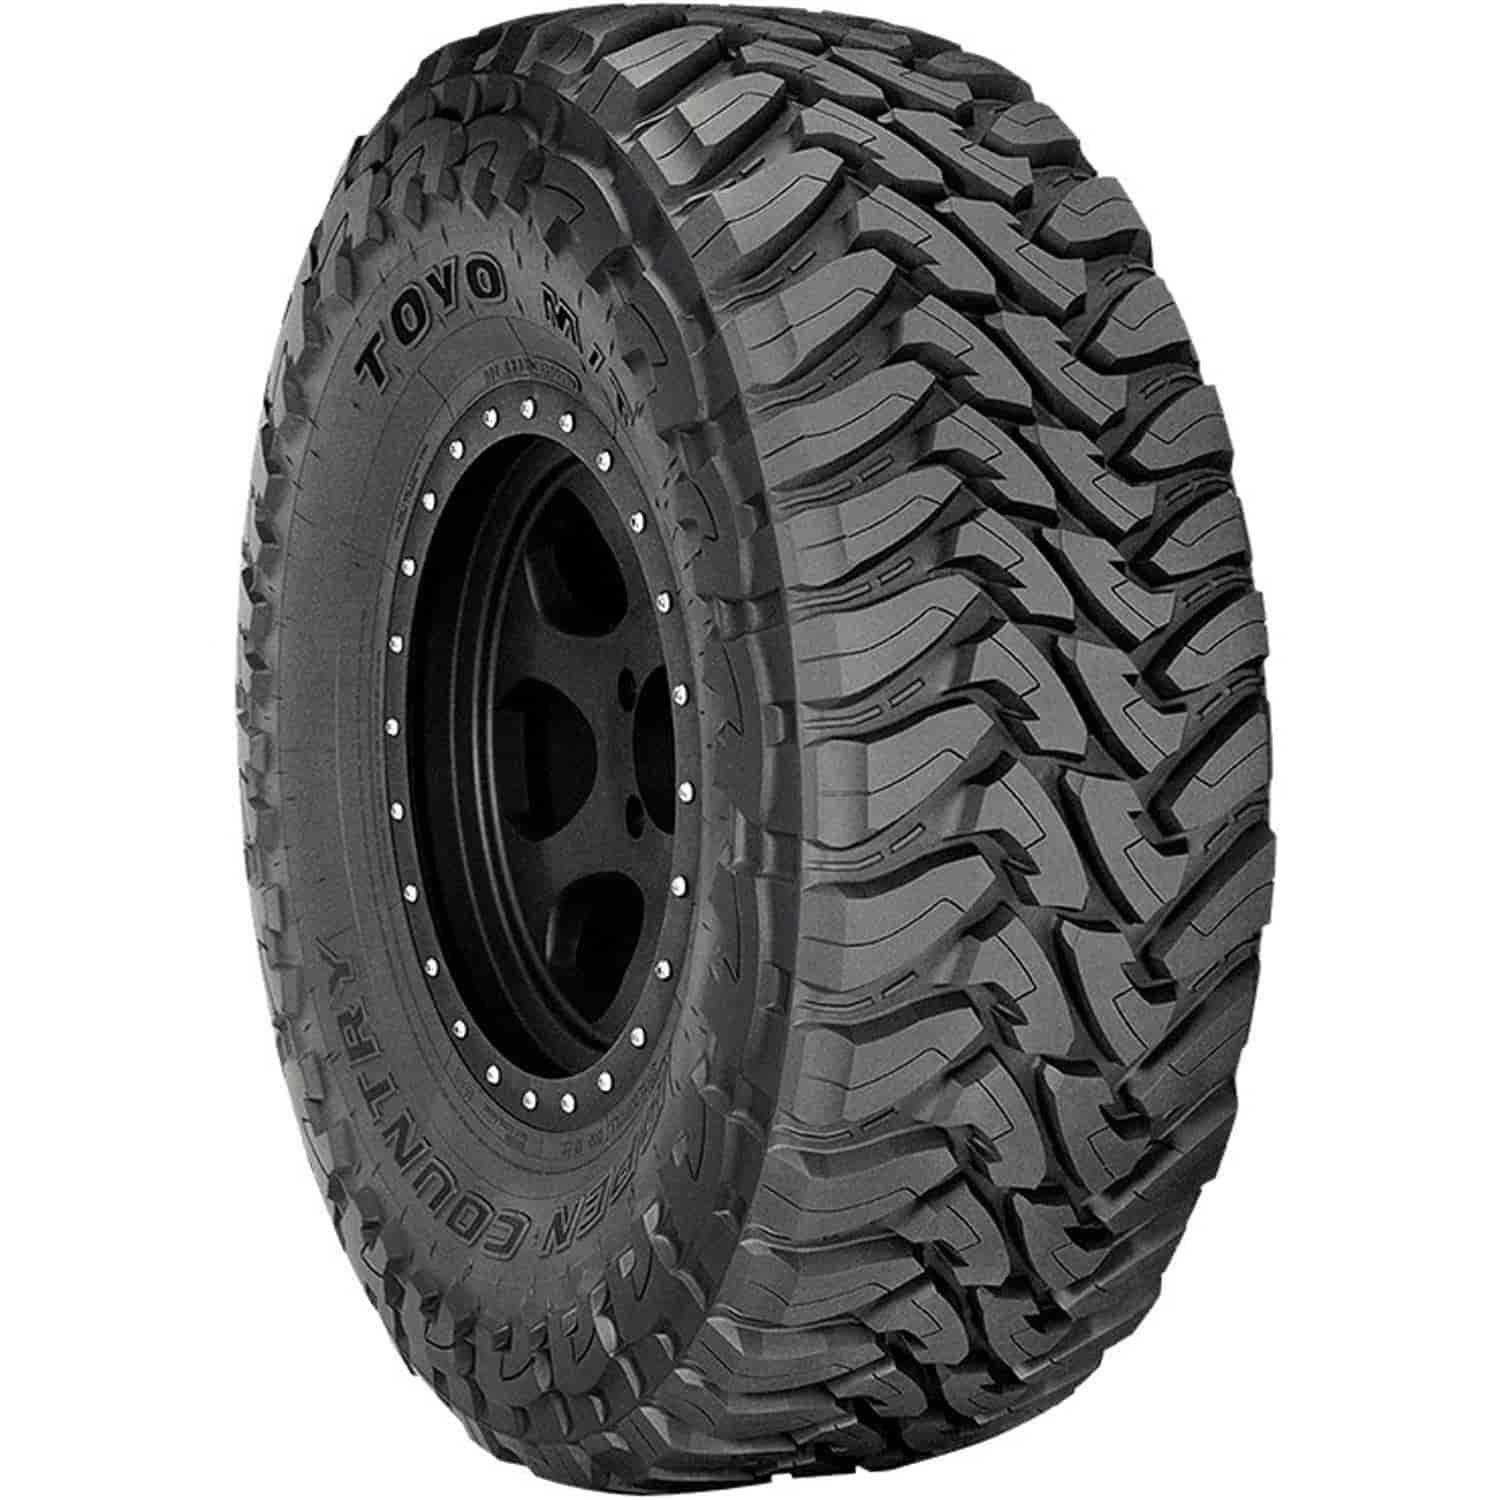 Open Country M/T LT285/70R17 121/118P E/10